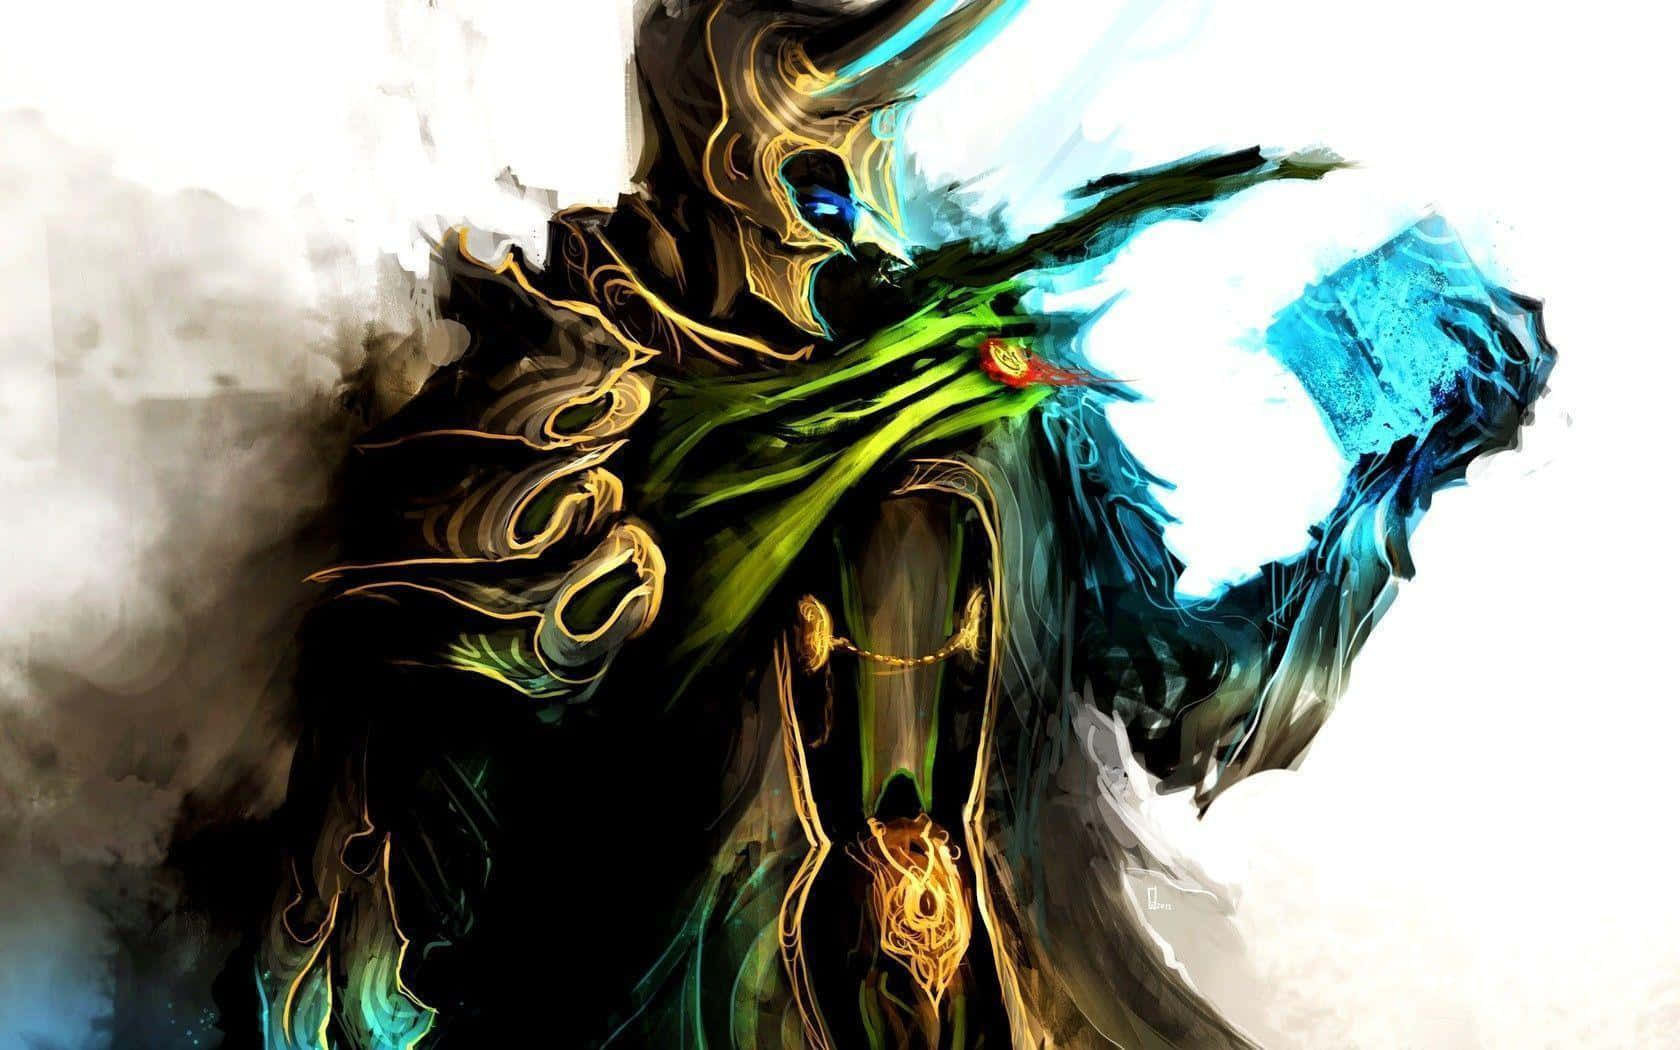 Odin’s adopted son, Loki, in the classic Marvel comic story Wallpaper